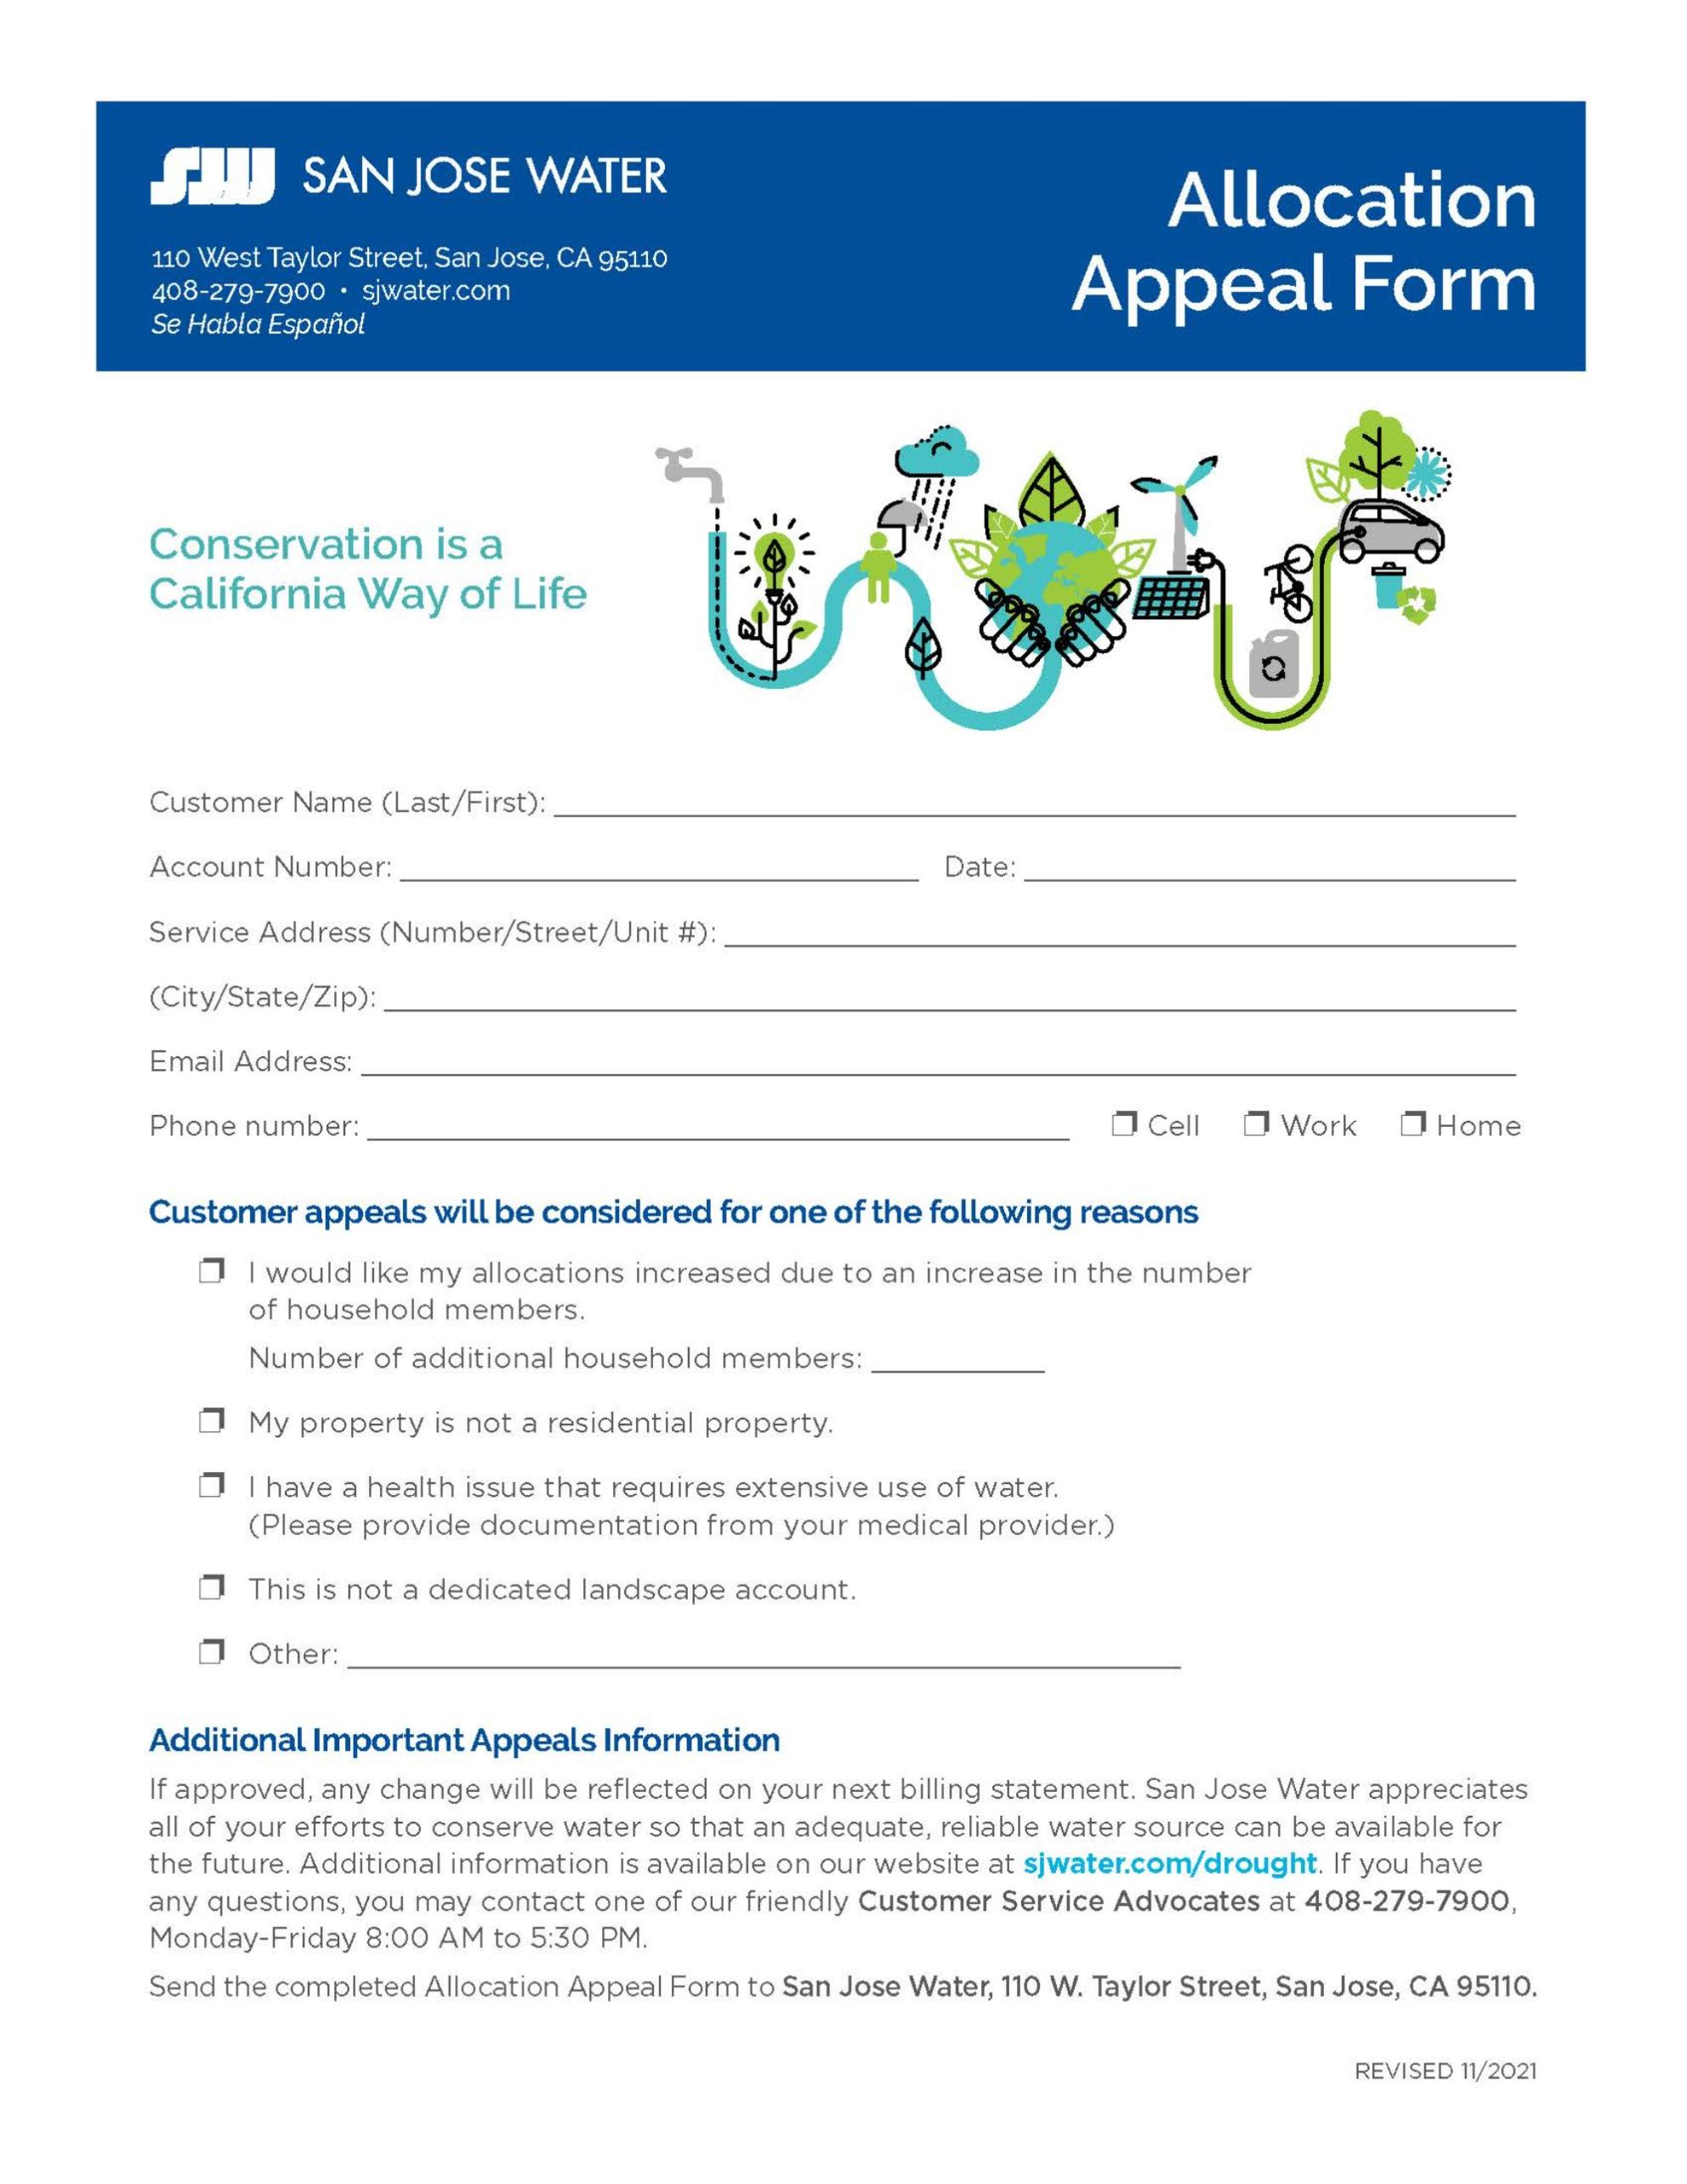 Preview image of the Allocation Appeal Form